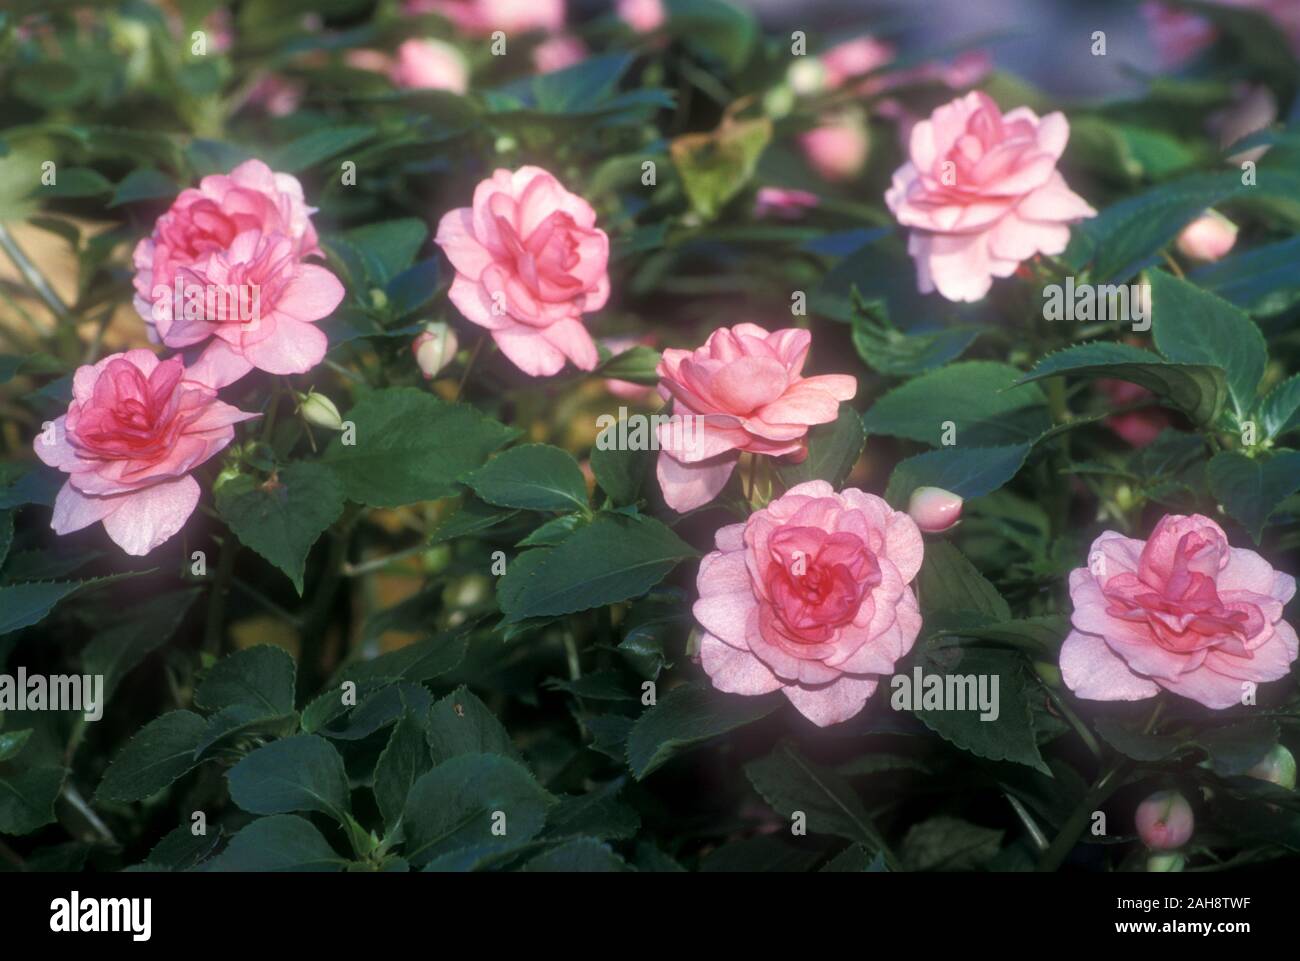 HEALTHY DOUBLE PINK IMPATIEN FLOWERS (COMMONLY KNOWN AS BUSY LIZZIES) Stock Photo